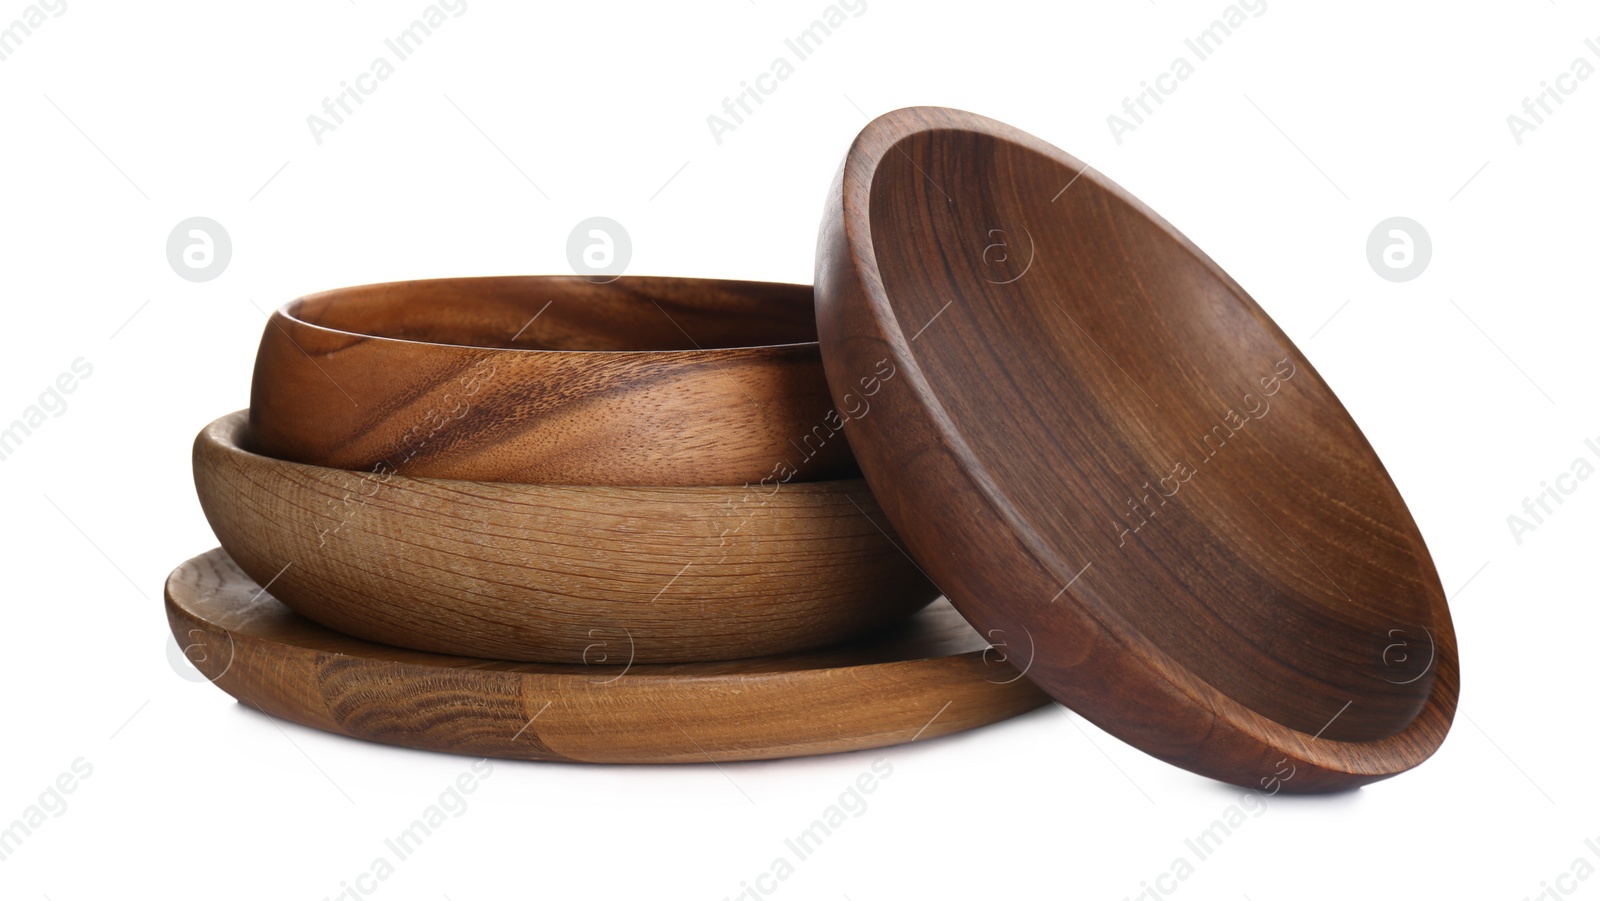 Photo of Wooden plate and bowls on white background